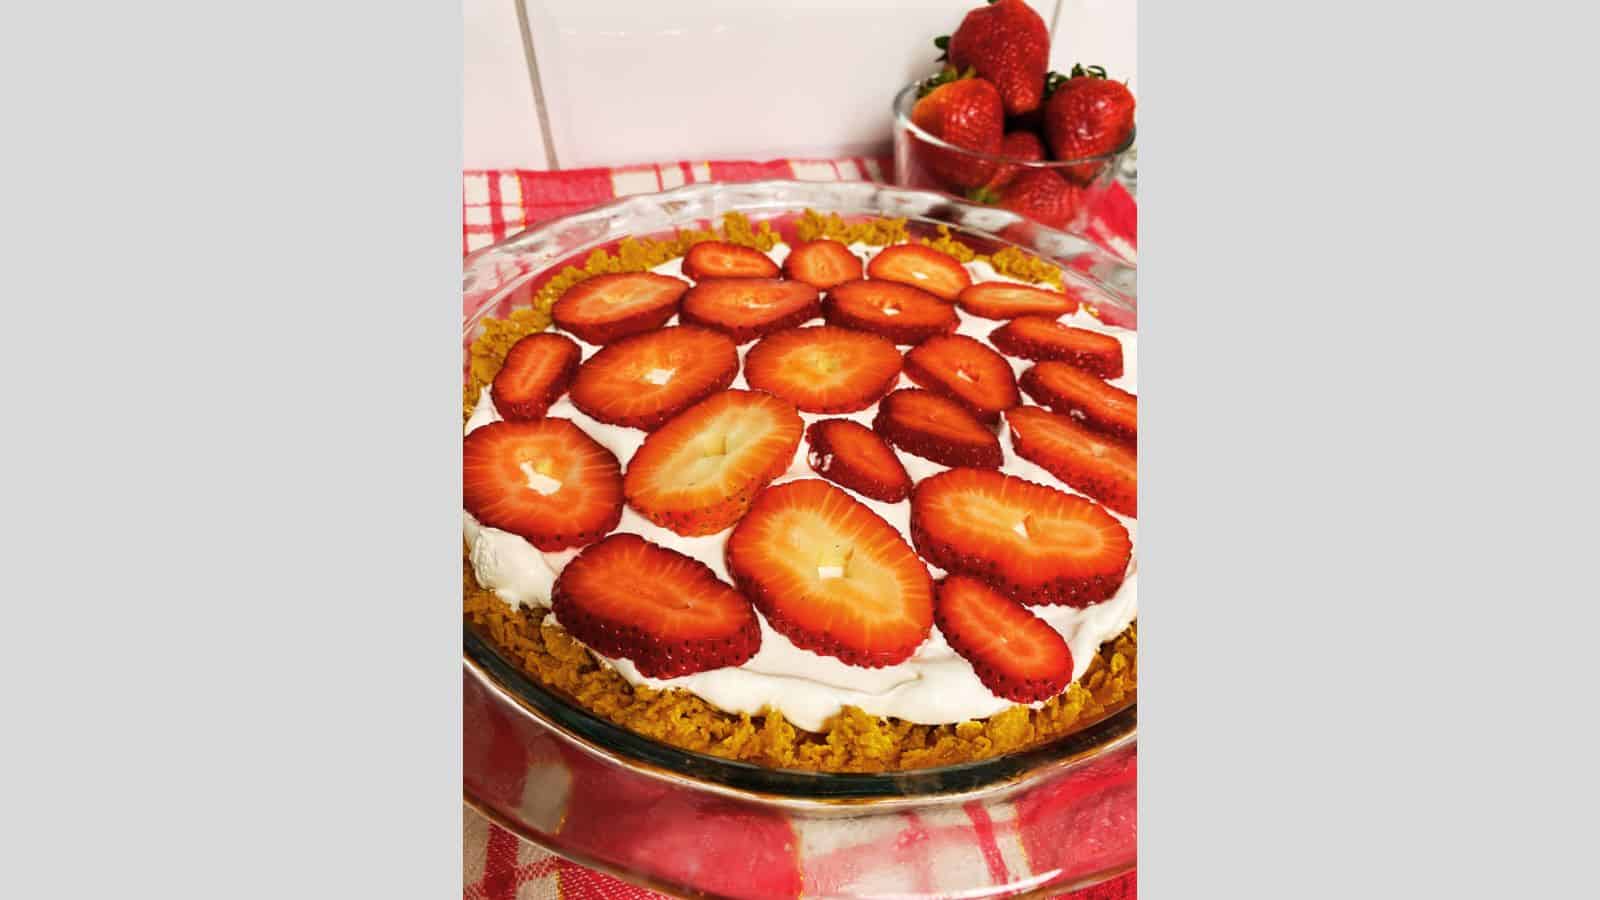 Strawberry cream pie in clear pie dish with bowl of strawberries in background.